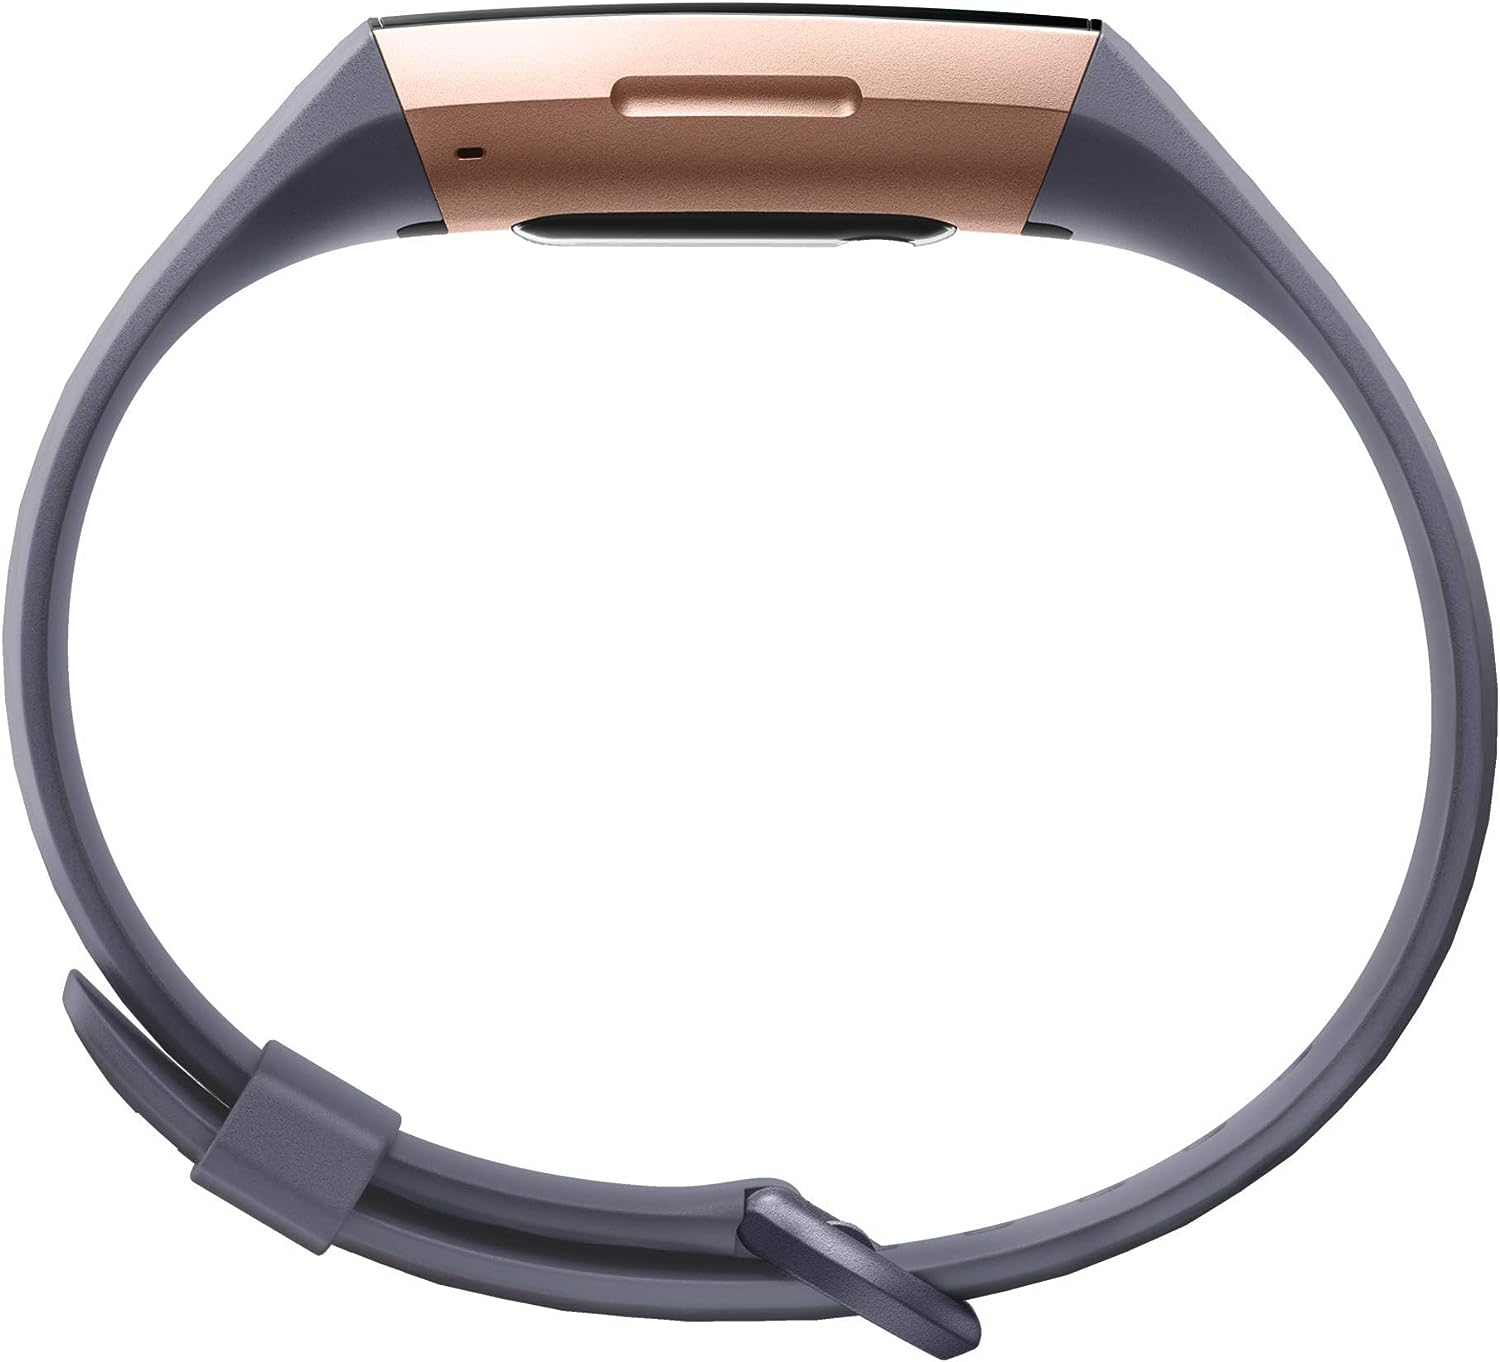 Fitbit Charge 3 Fitness Wristband With Heart Rate Tracker FB409 - Rose Gold/Grey